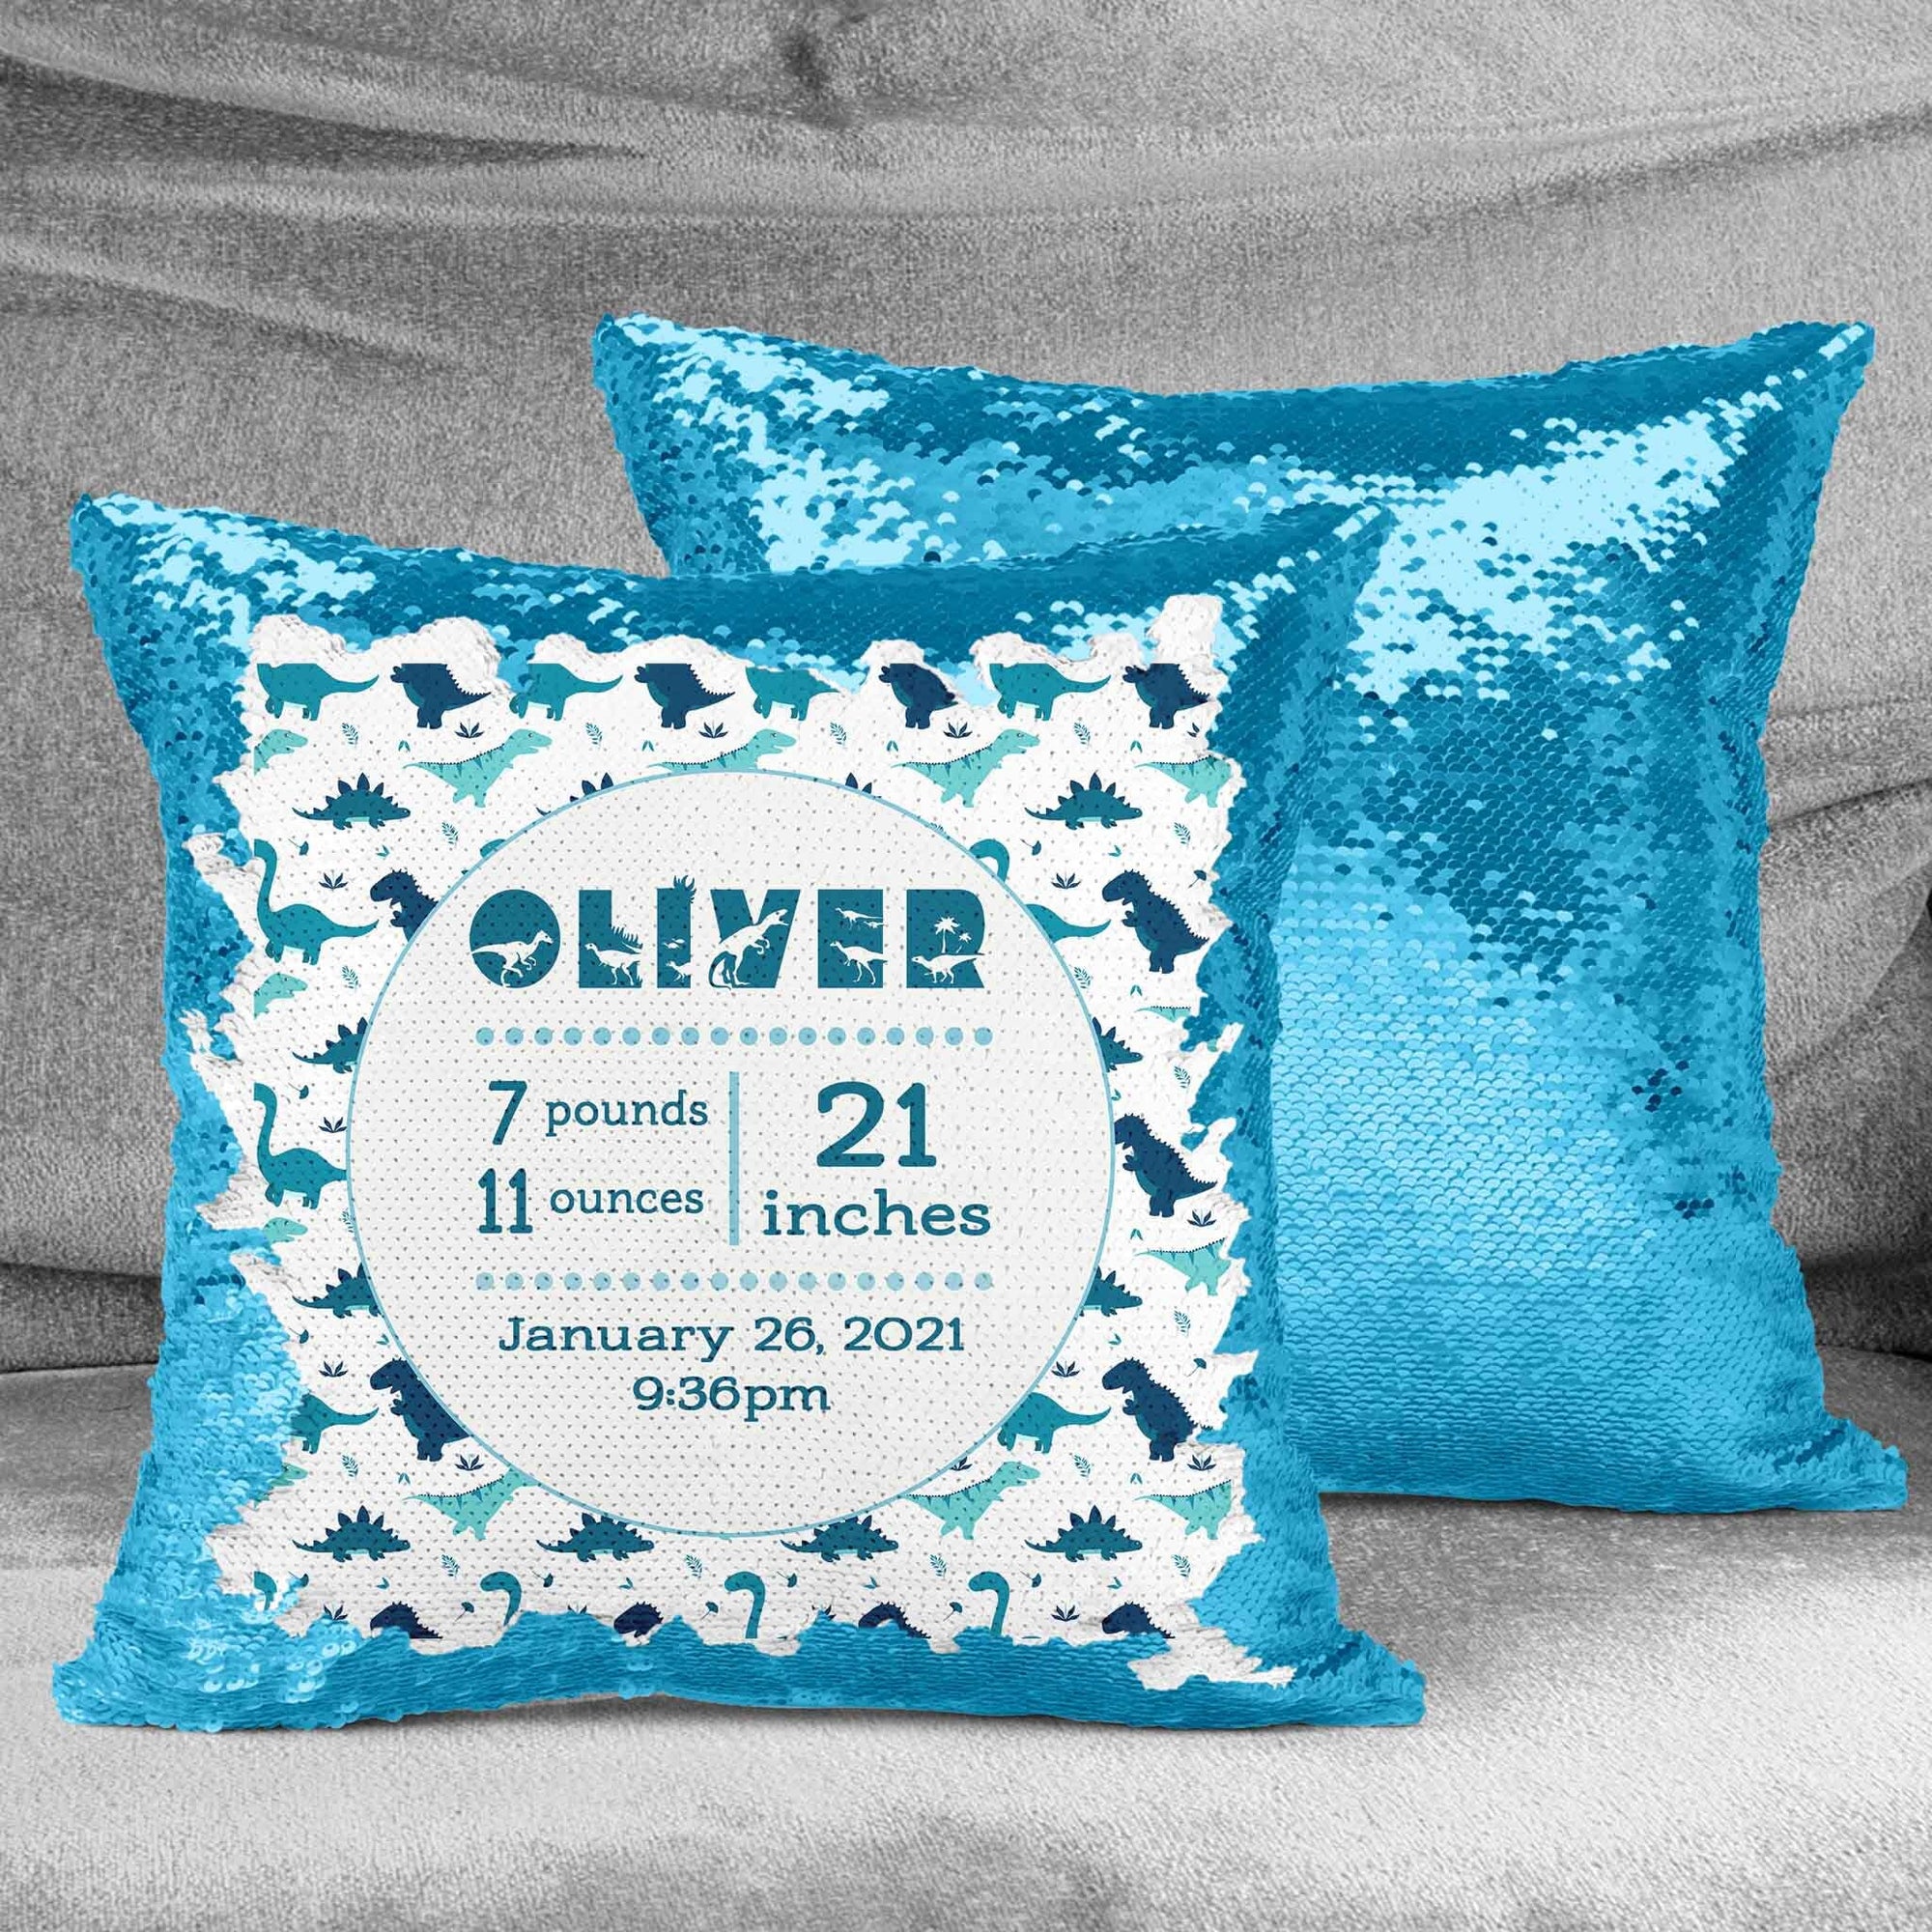 Personalized Sequin Throw Pillow | Custom Sequin Pillow | Dinosaur Baby Stats